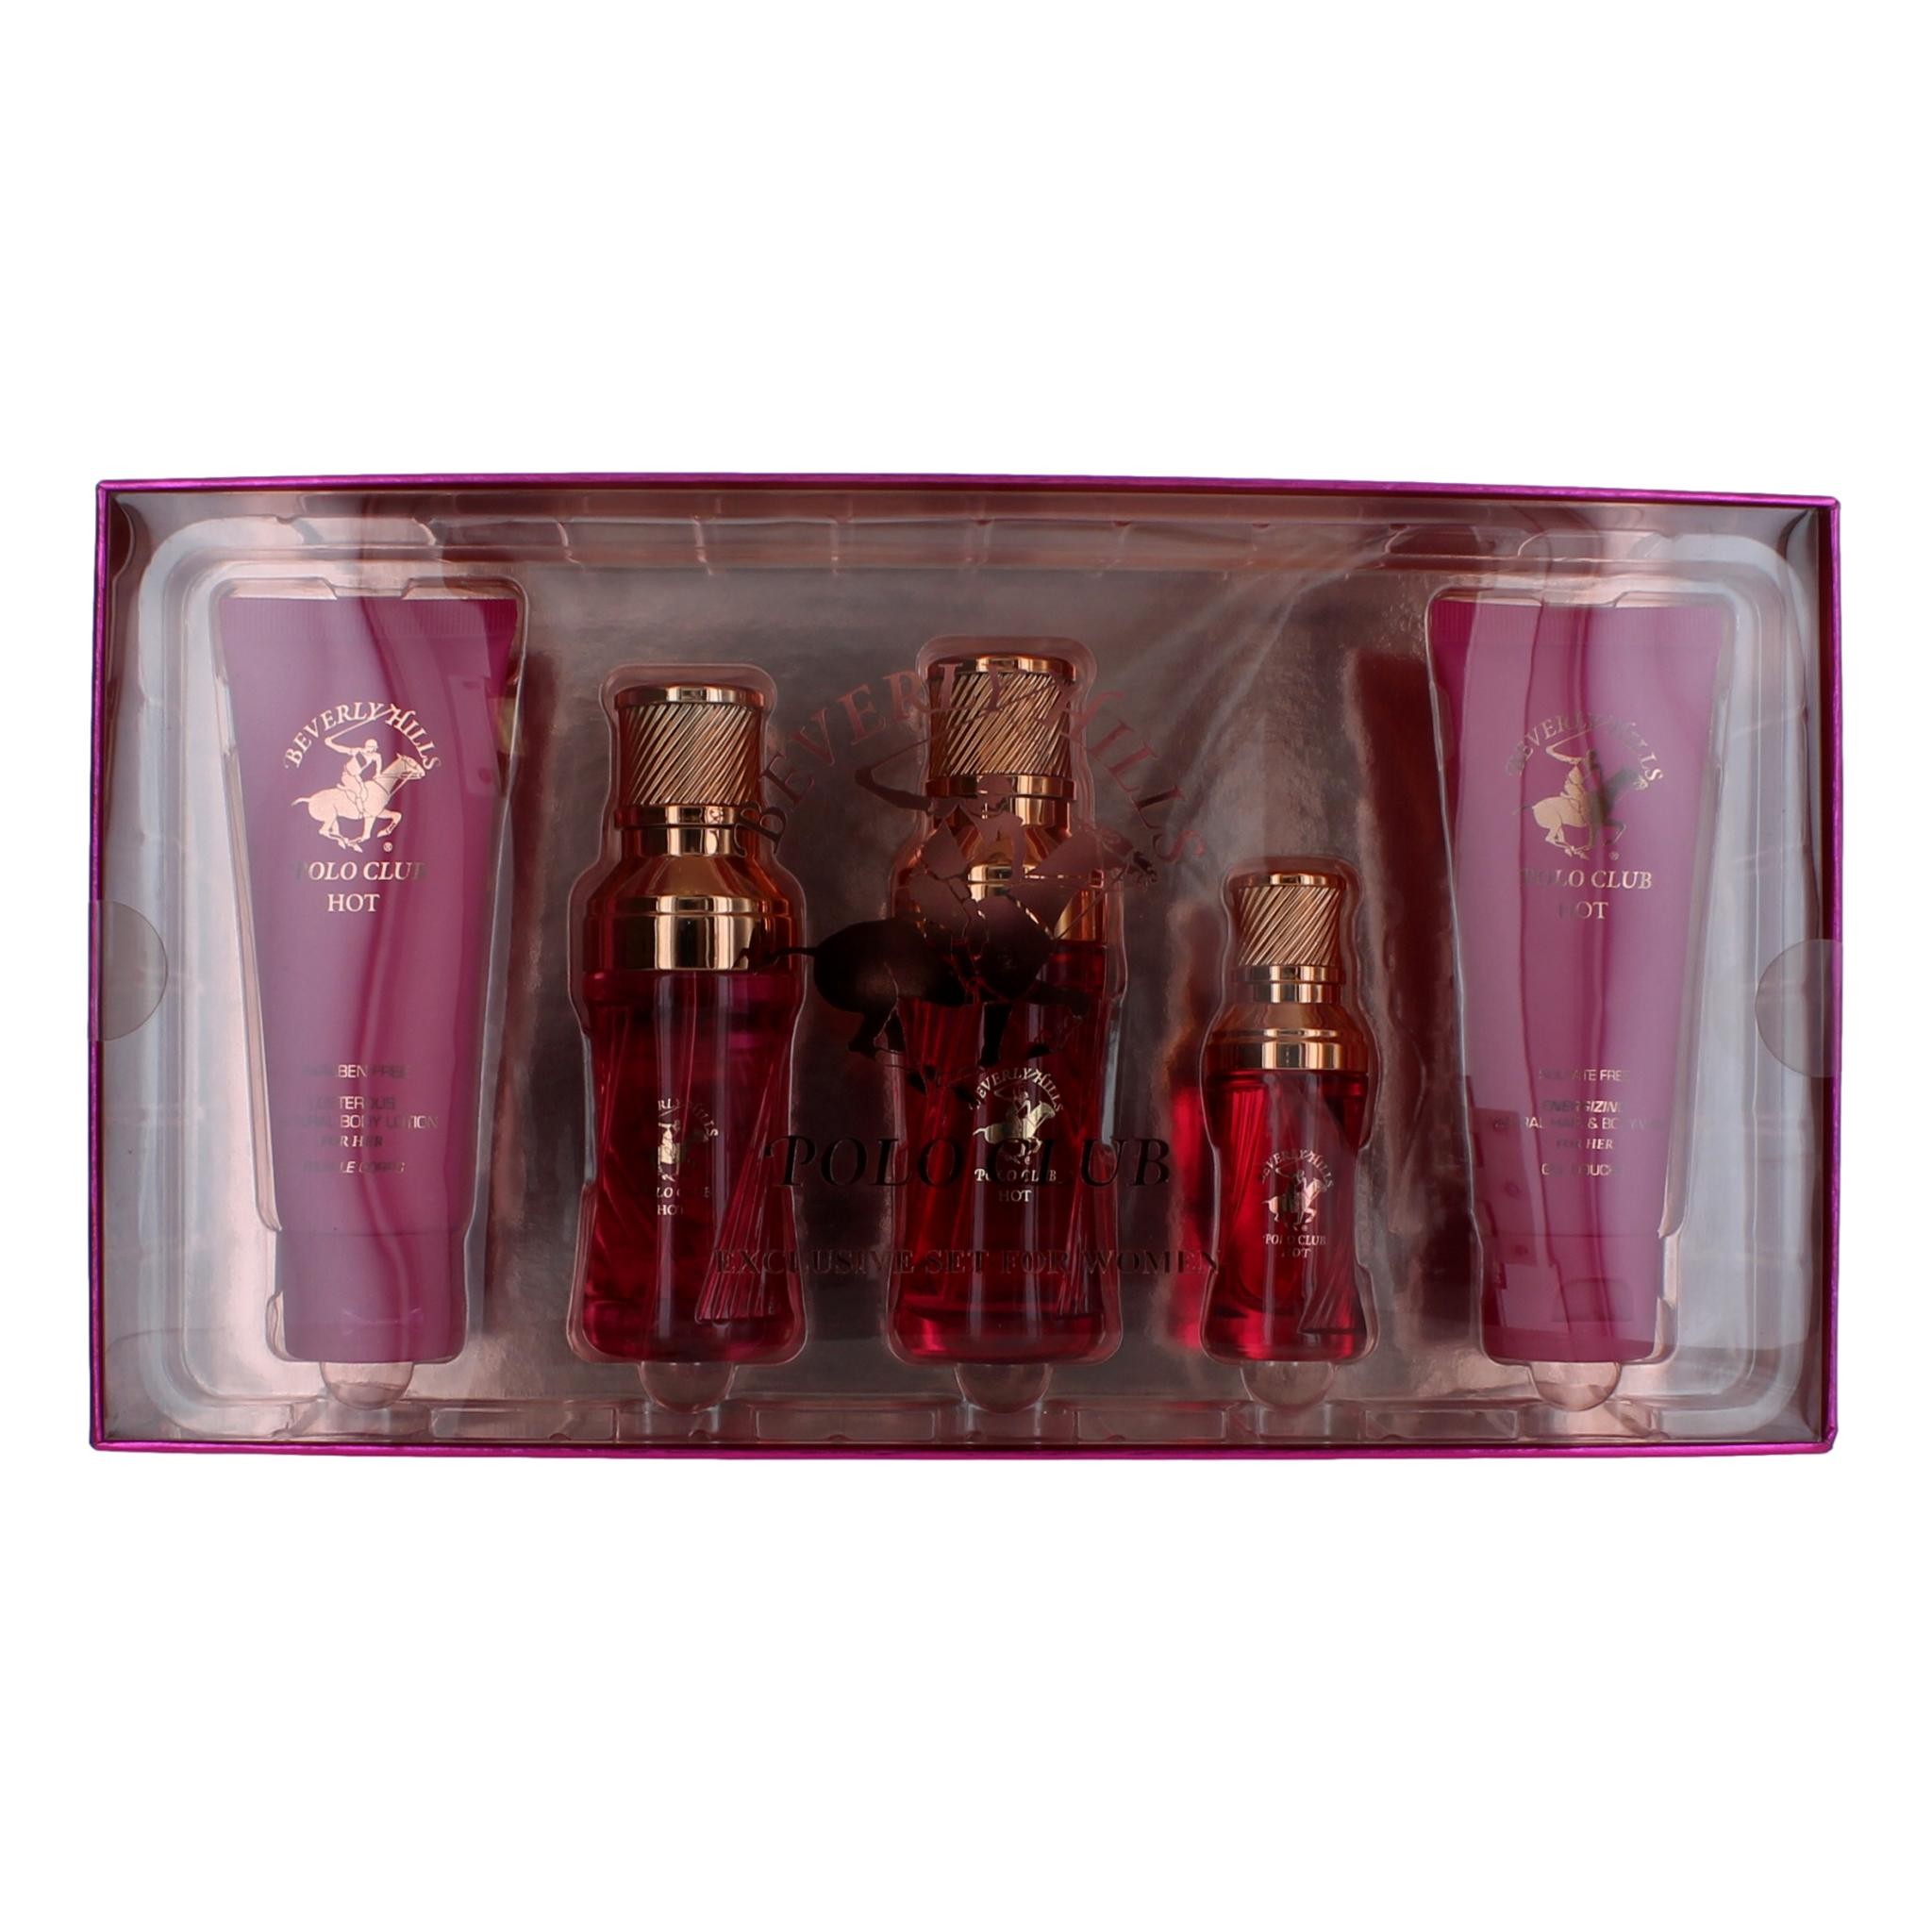 BHPC Hot by Beverly Hills Polo Club 5 Piece Gift Set for Women